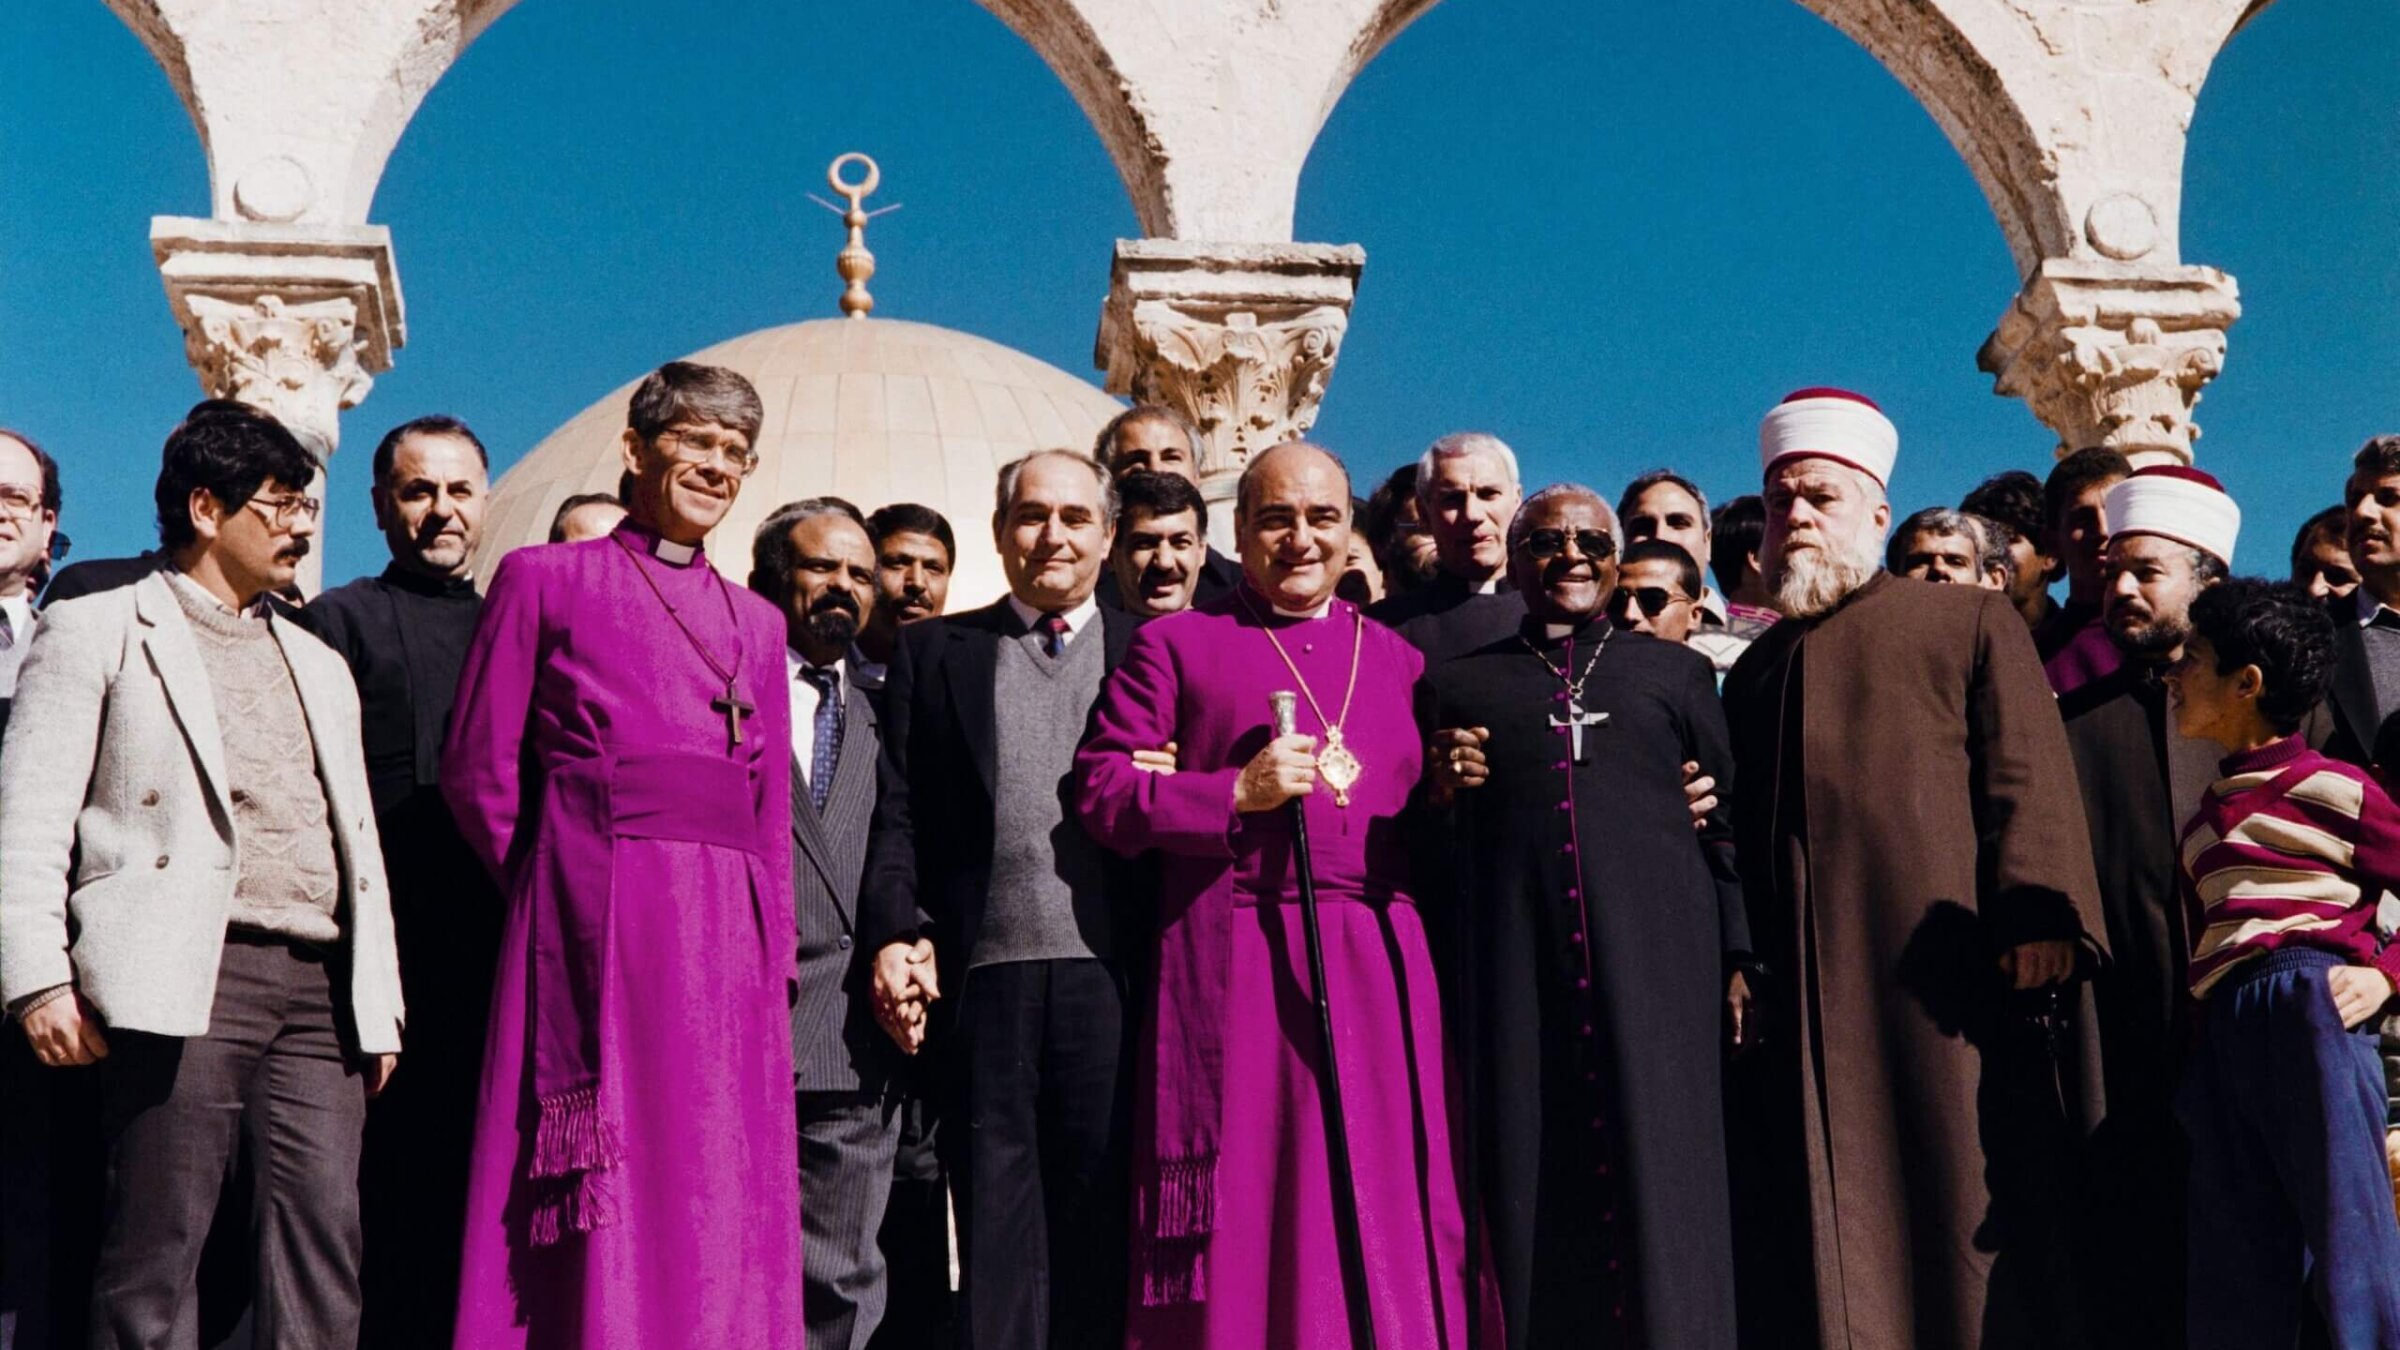 South African activist and Nobel laureate Desmond Tutu (third from right) poses with members of clergy and Palestinian leaders Faisal Husseini and Radwan Abu Ayash on December 23, 1989 during his visit in Jerusalem. 